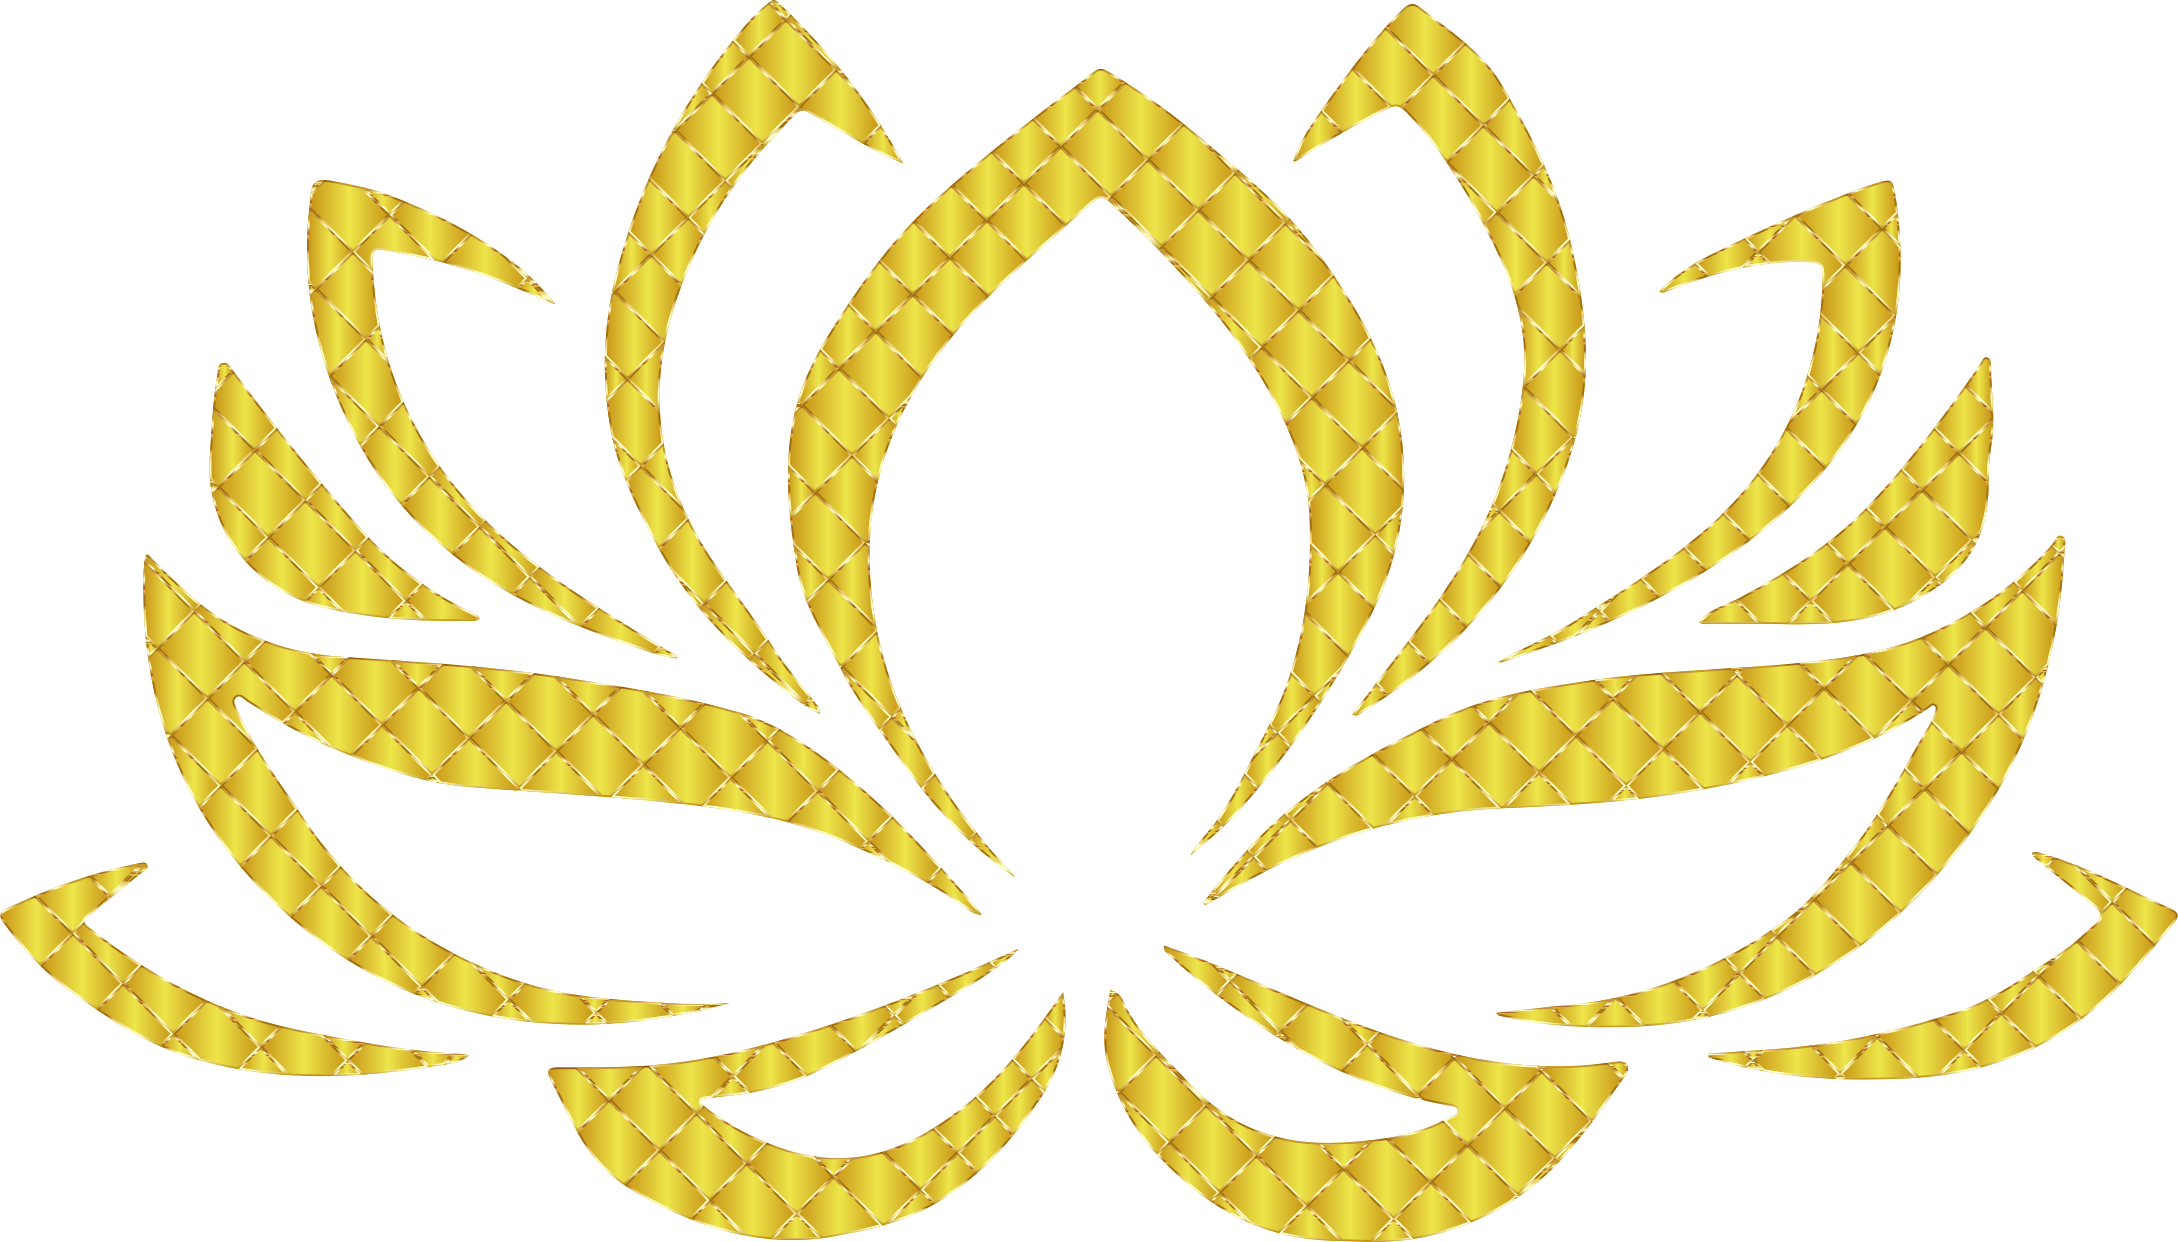 This Free Icons Png Design Of Golden Lotus Flower 3 - Lotus Flower Black And White (2178x1242)